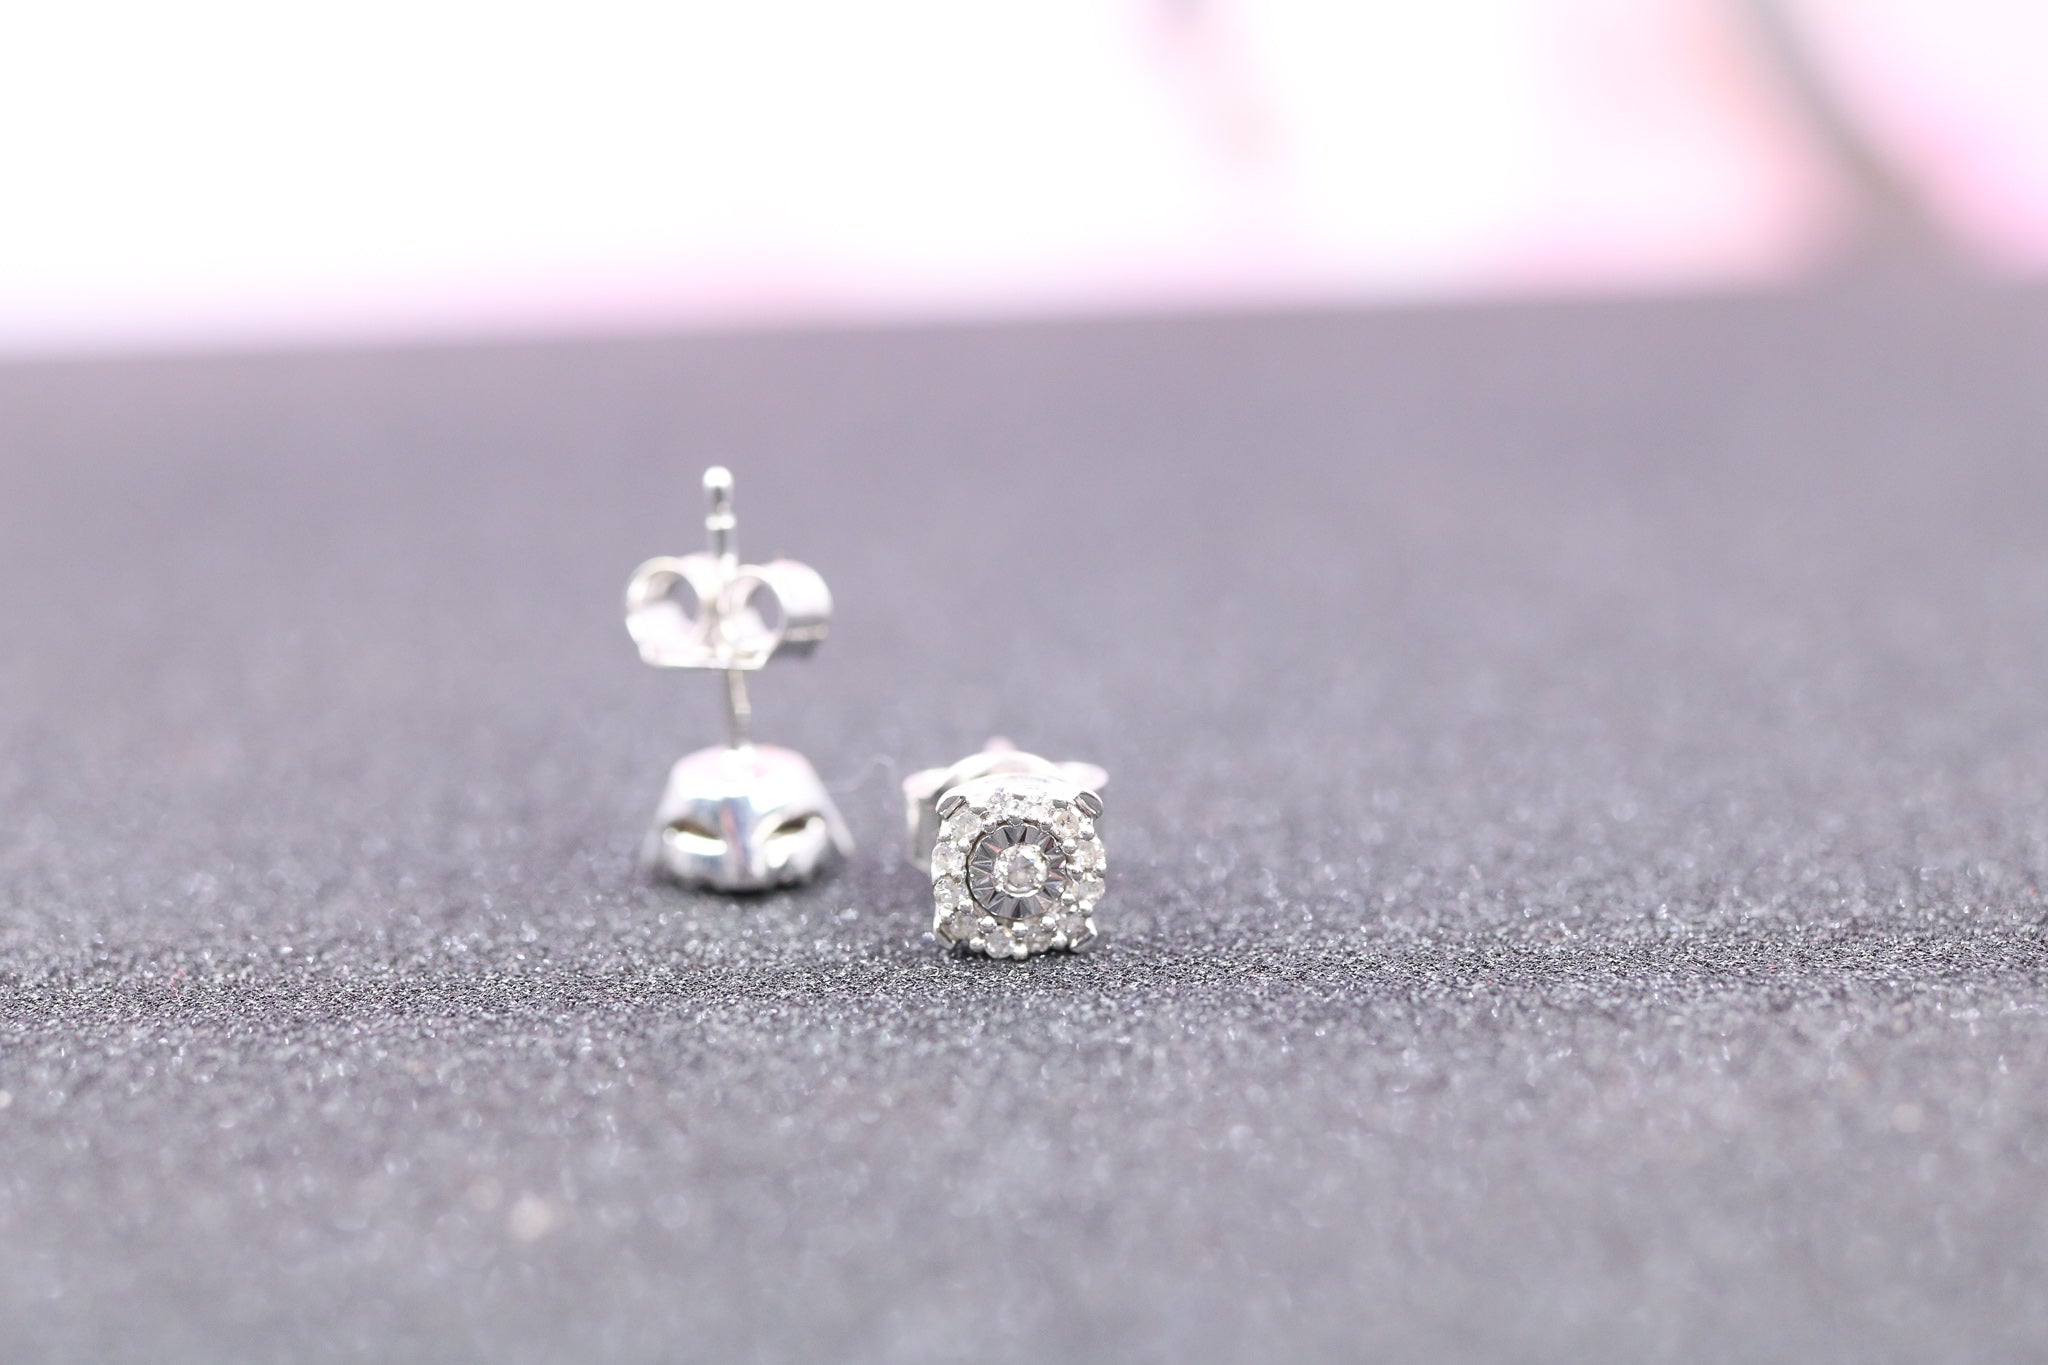 9ct White Gold & Diamond Earrings - HJ2763 - Hallmark Jewellers Formby & The Jewellers Bench Widnes